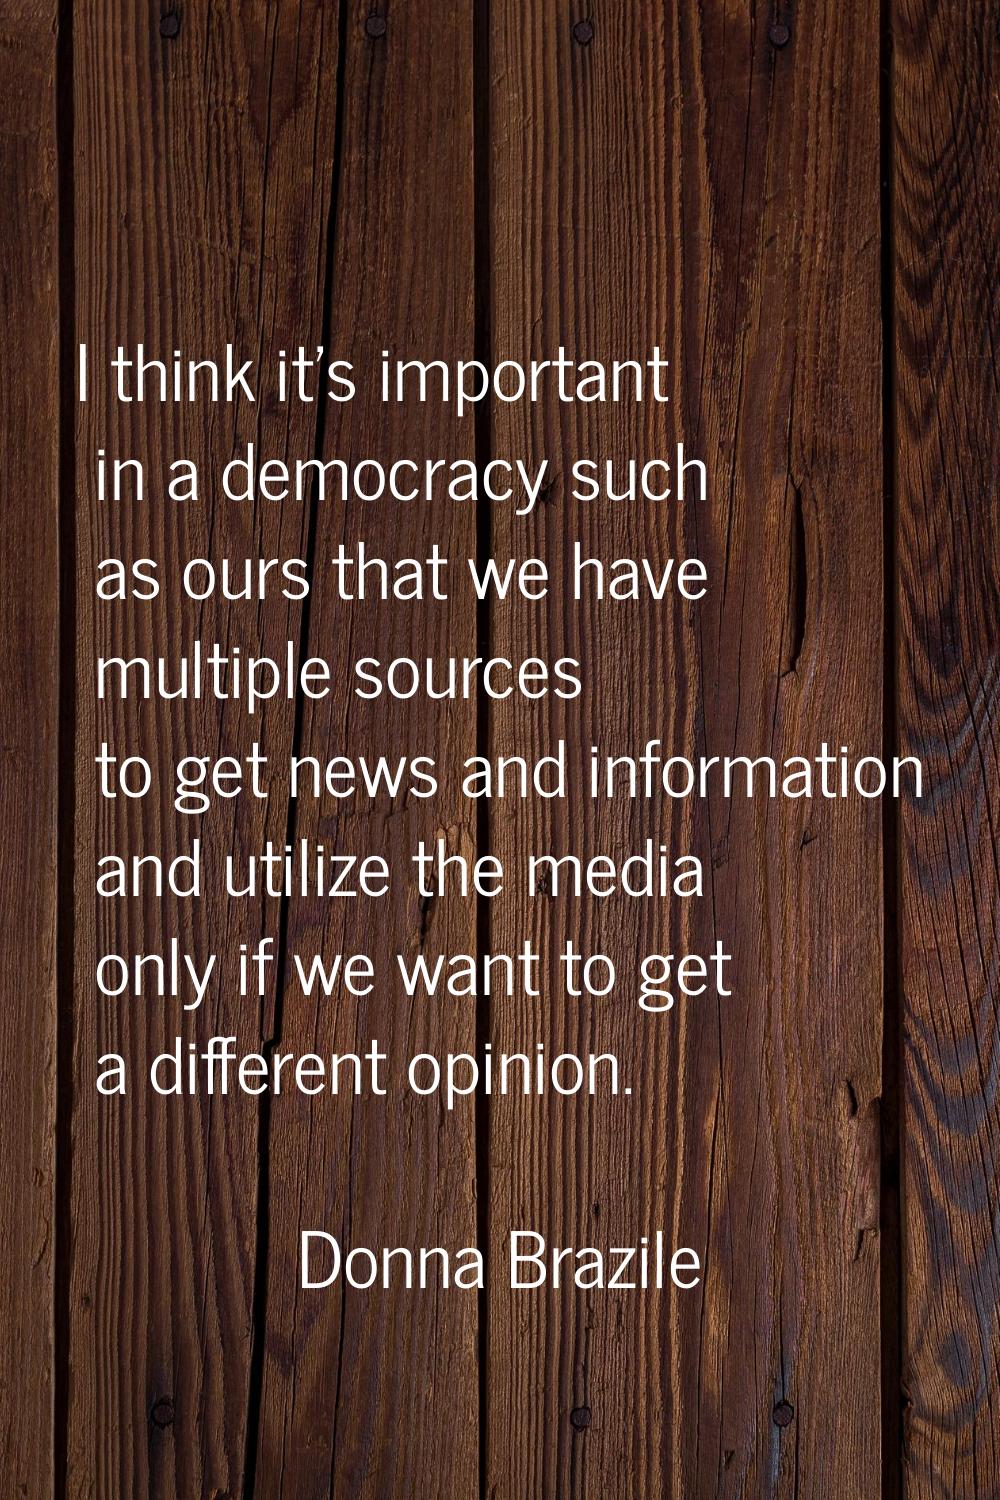 I think it's important in a democracy such as ours that we have multiple sources to get news and in